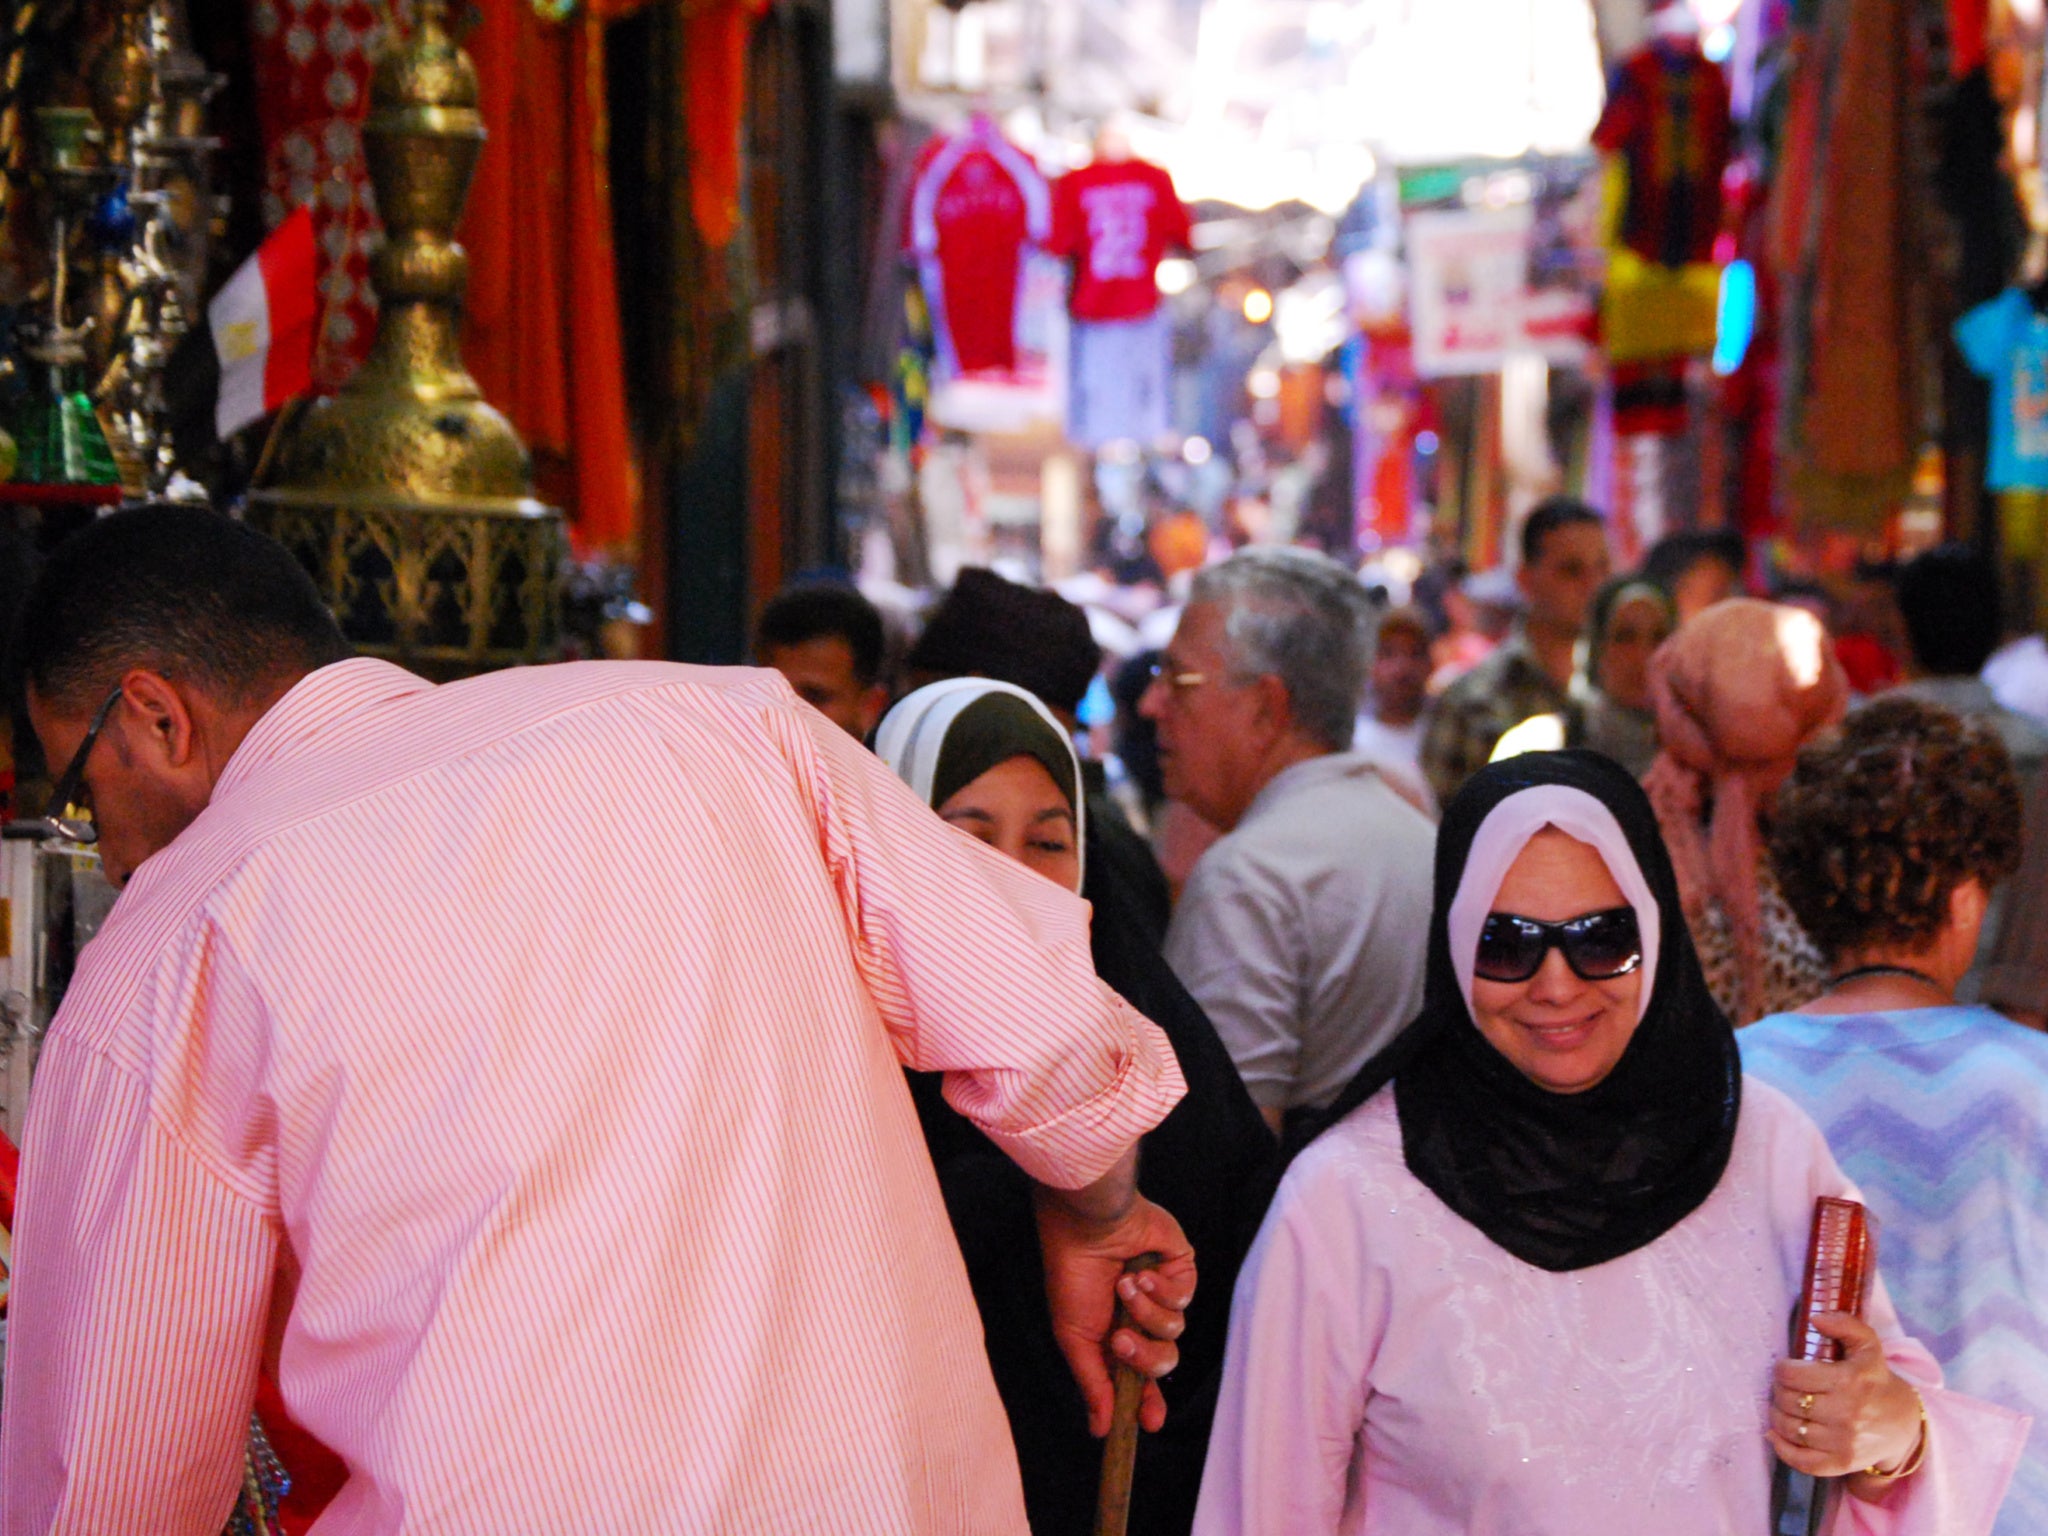 Khan al Khalili Market is one of the most popular places to find a bargain in Cairo